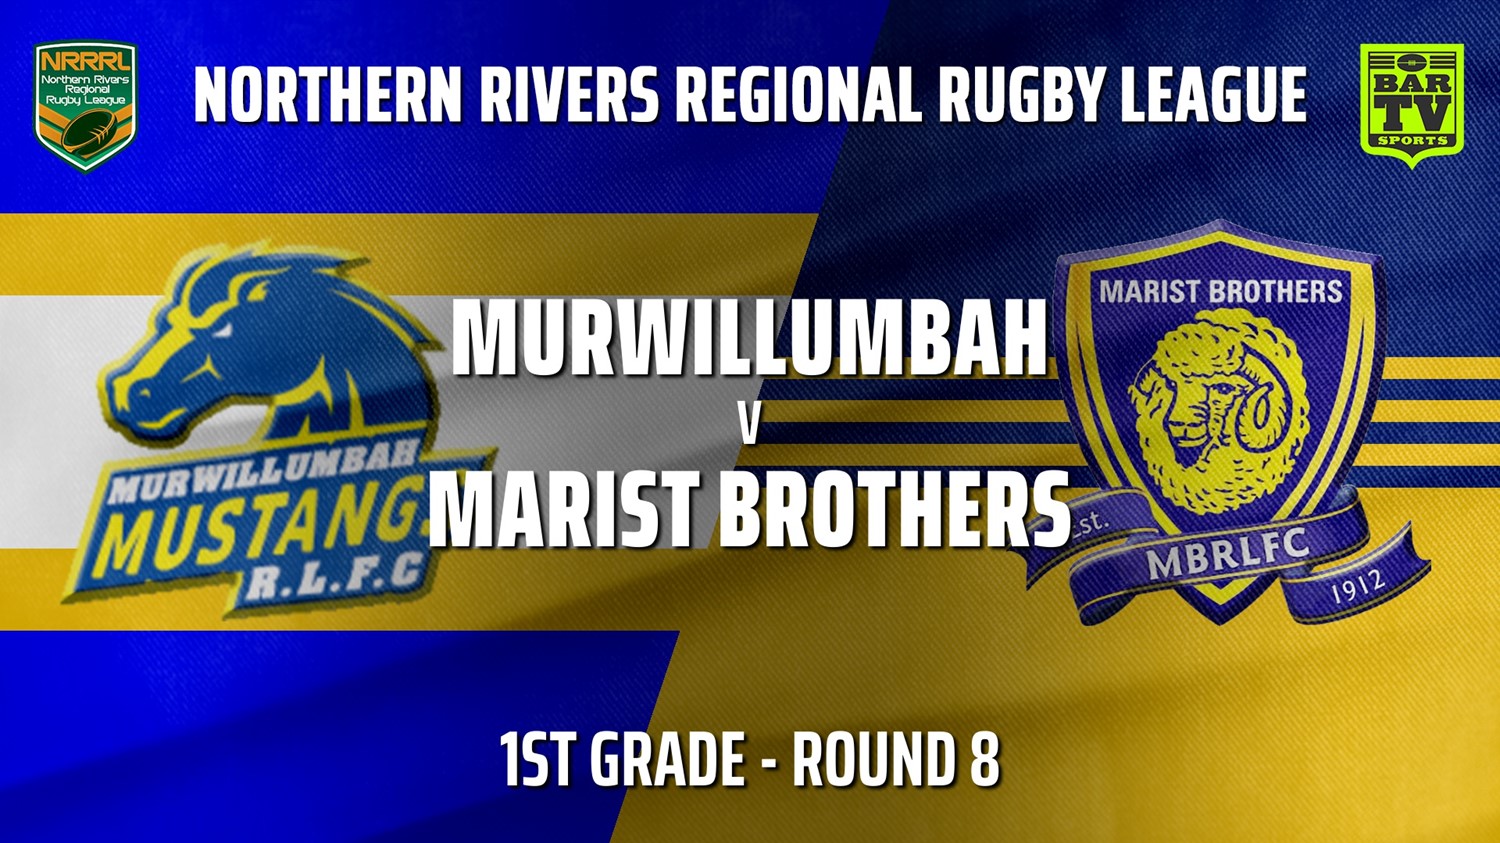 210627-Northern Rivers Round 8 - 1st Grade - Murwillumbah Mustangs v Lismore Marist Brothers Rams Minigame Slate Image